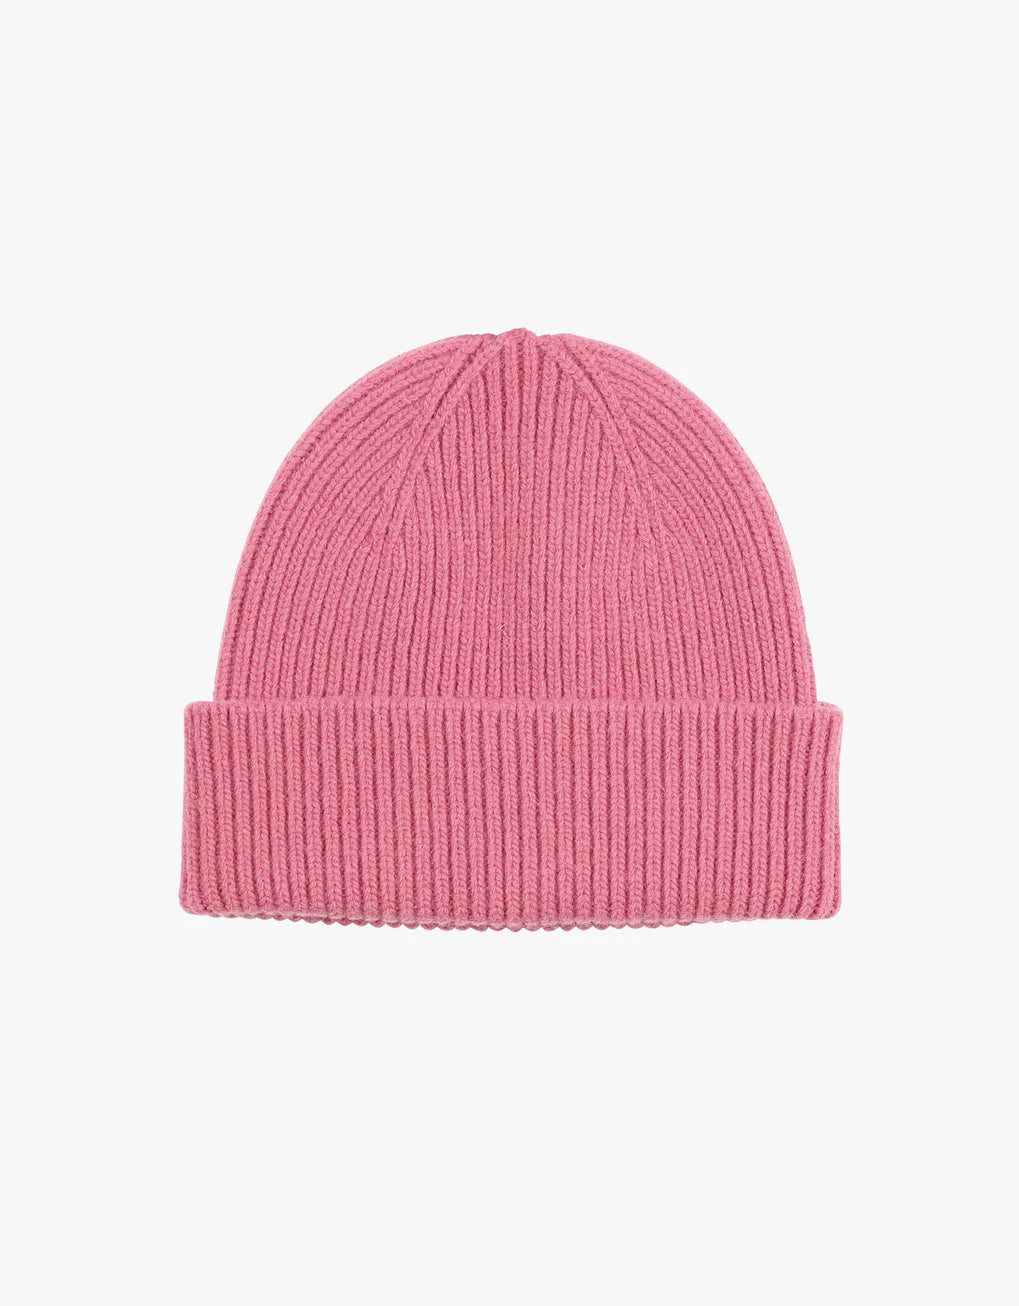 A Merino Wool Beanie on a white background by Colorful Standard.